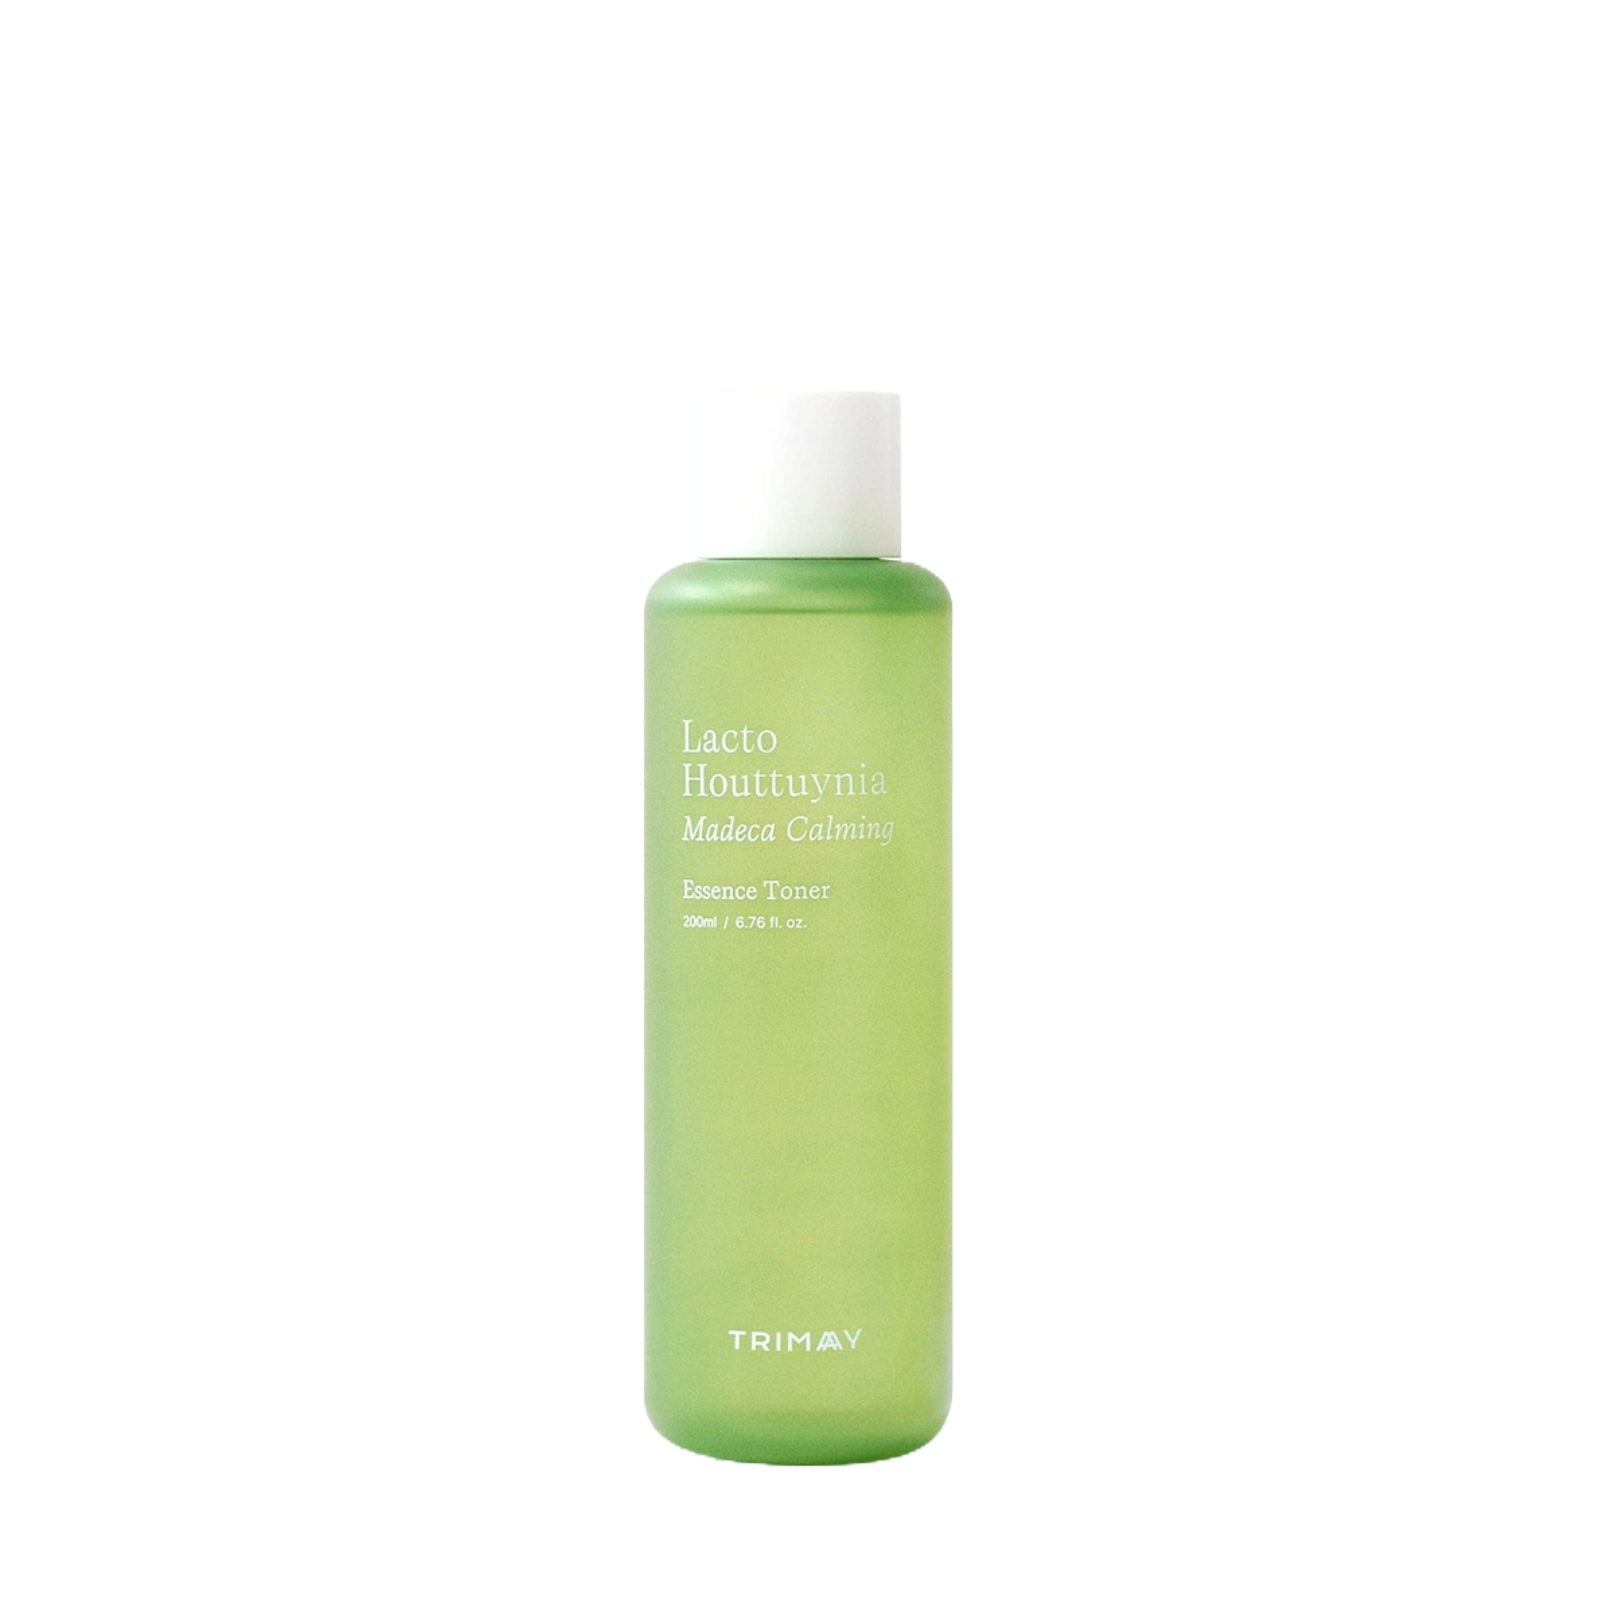 Soothing toner-essence for face by Trimay (Trimay Lacto Houttuynia Madeca Calming Essence Toner)